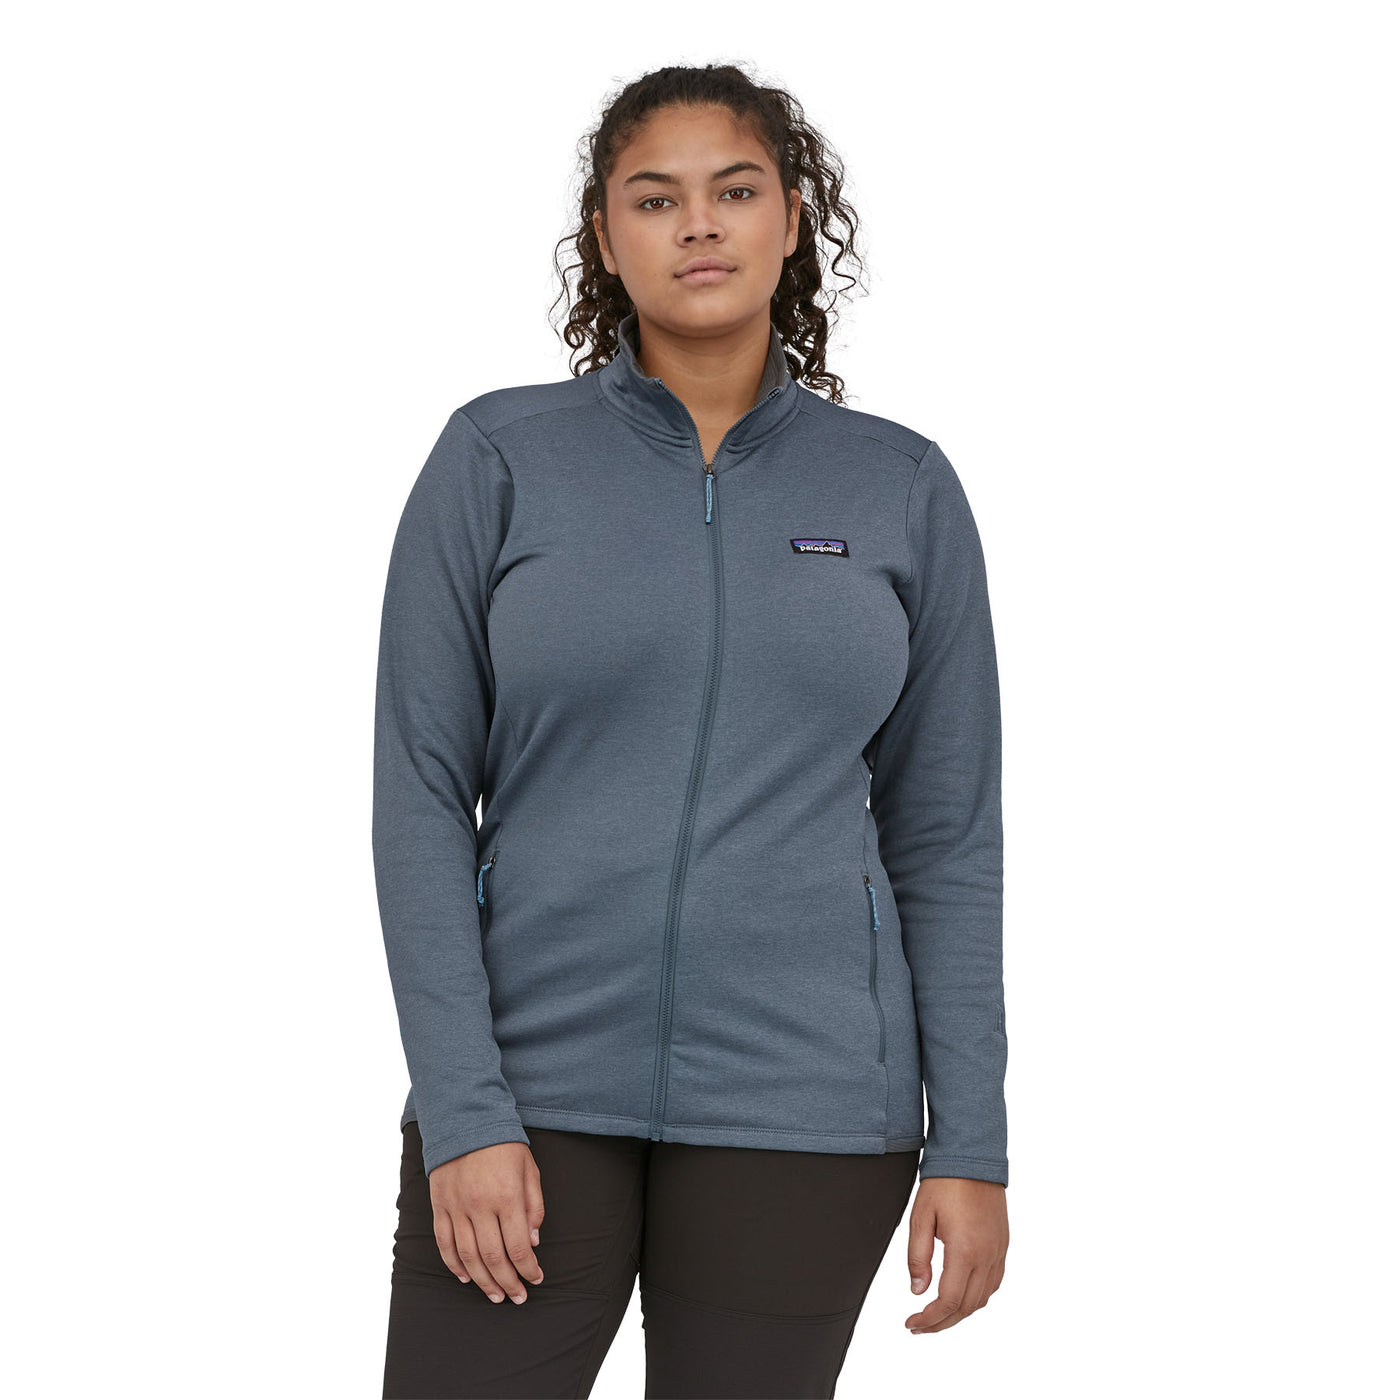 Women's R1 Daily Jacket